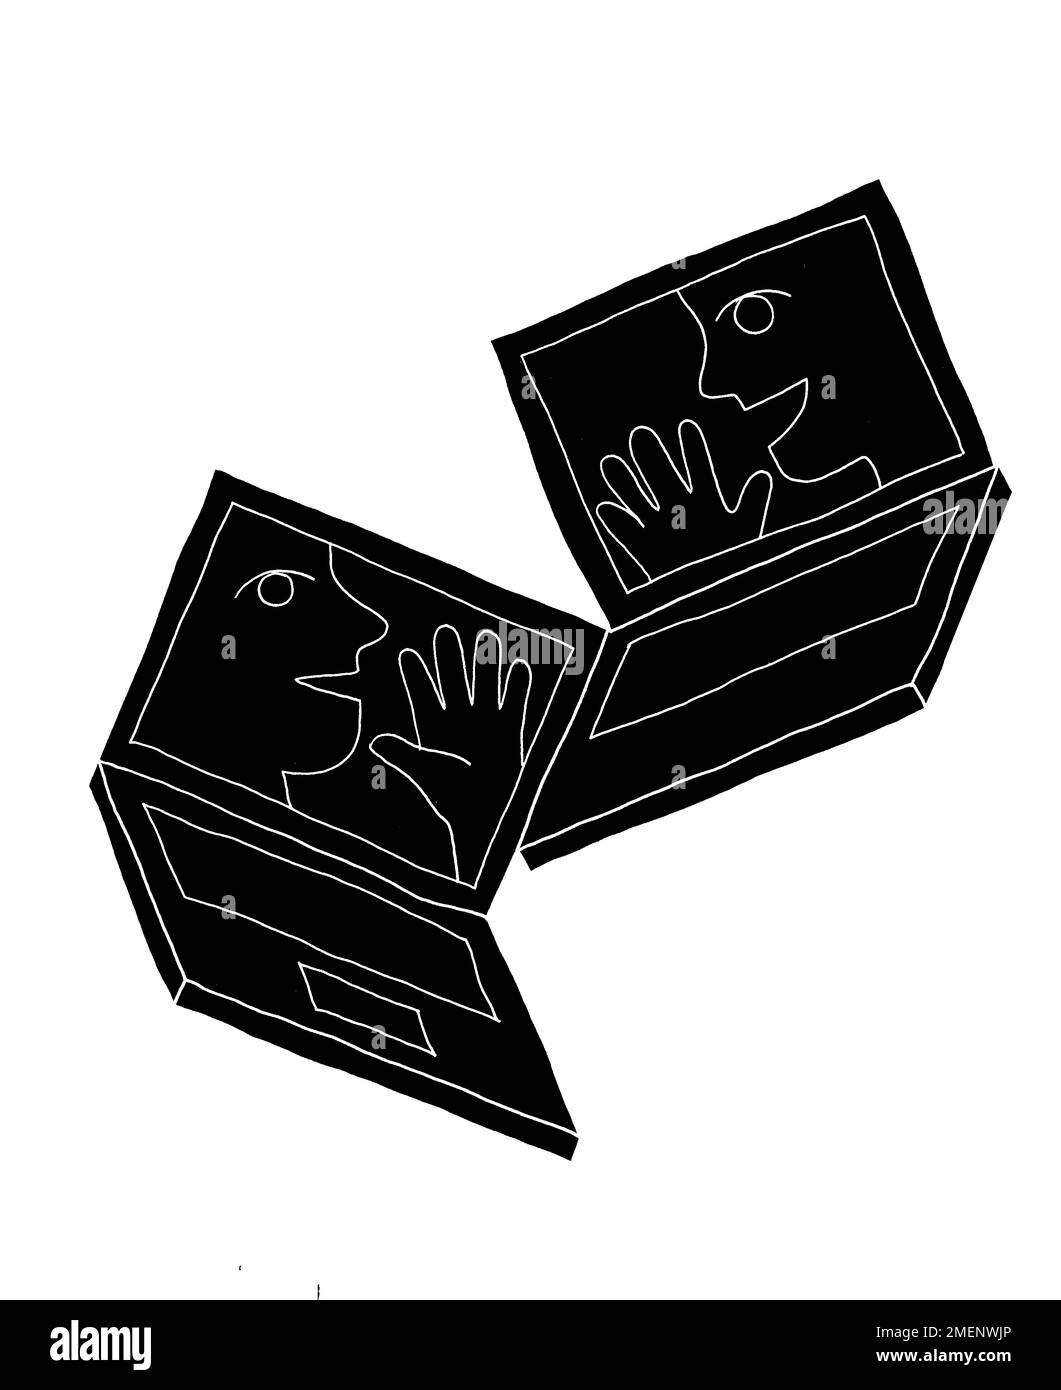 Black and white illustration of two laptops with faces superimposed on the screens Stock Photo